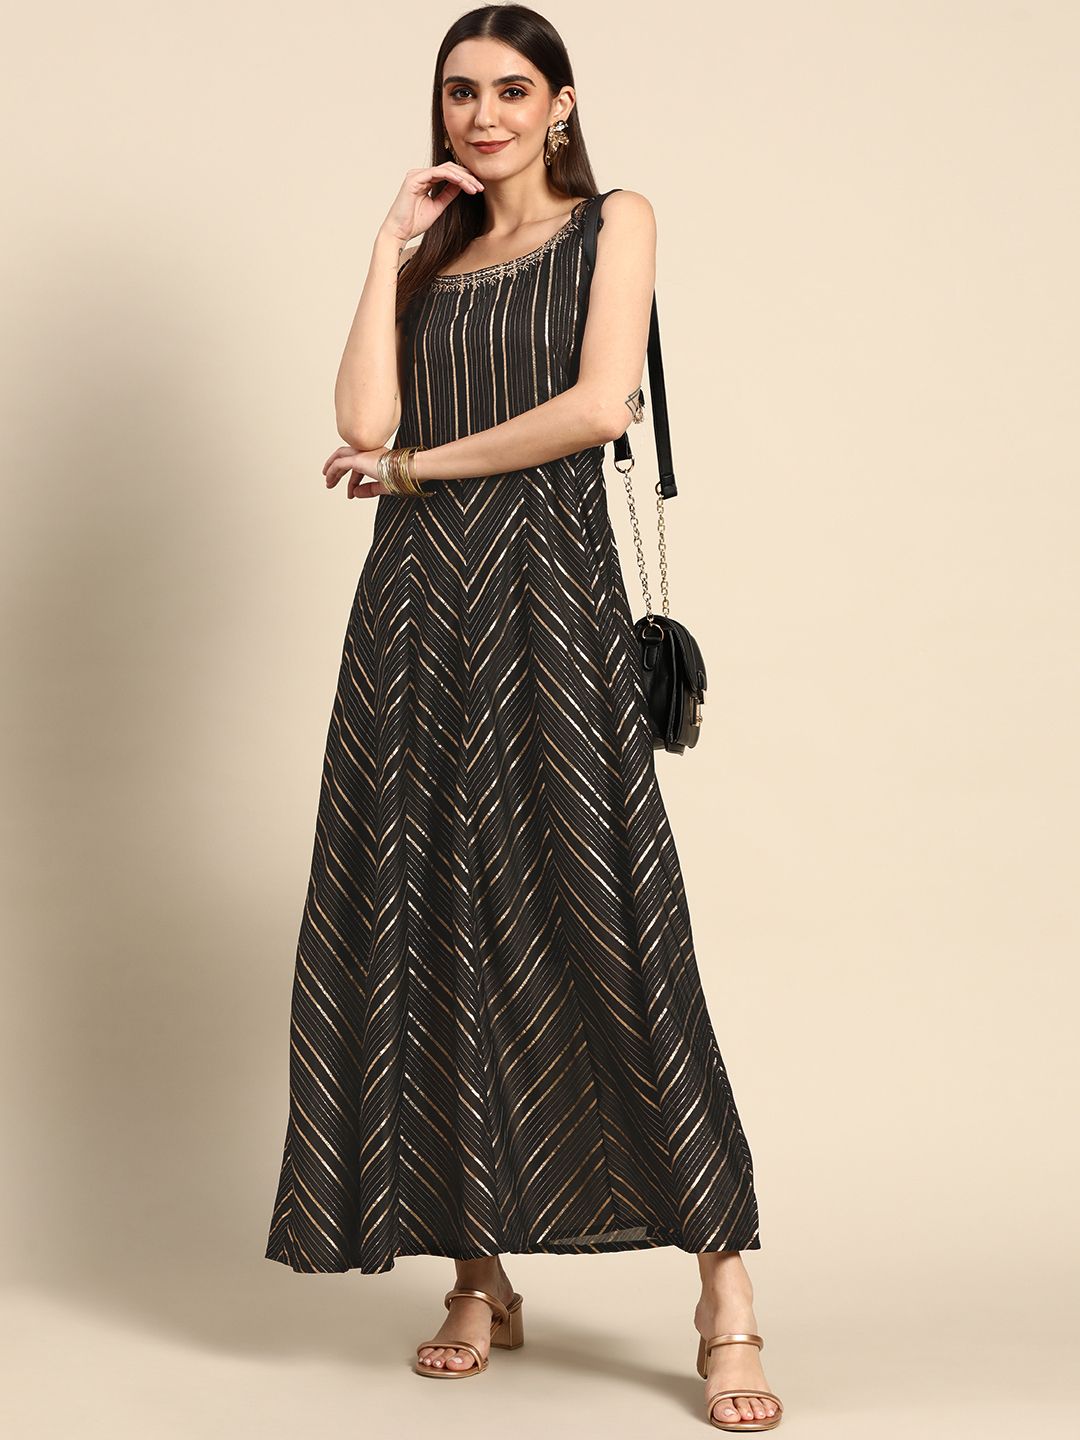 Anouk Black & Golden Striped Ethnic A-Line Maxi Dress Price in India